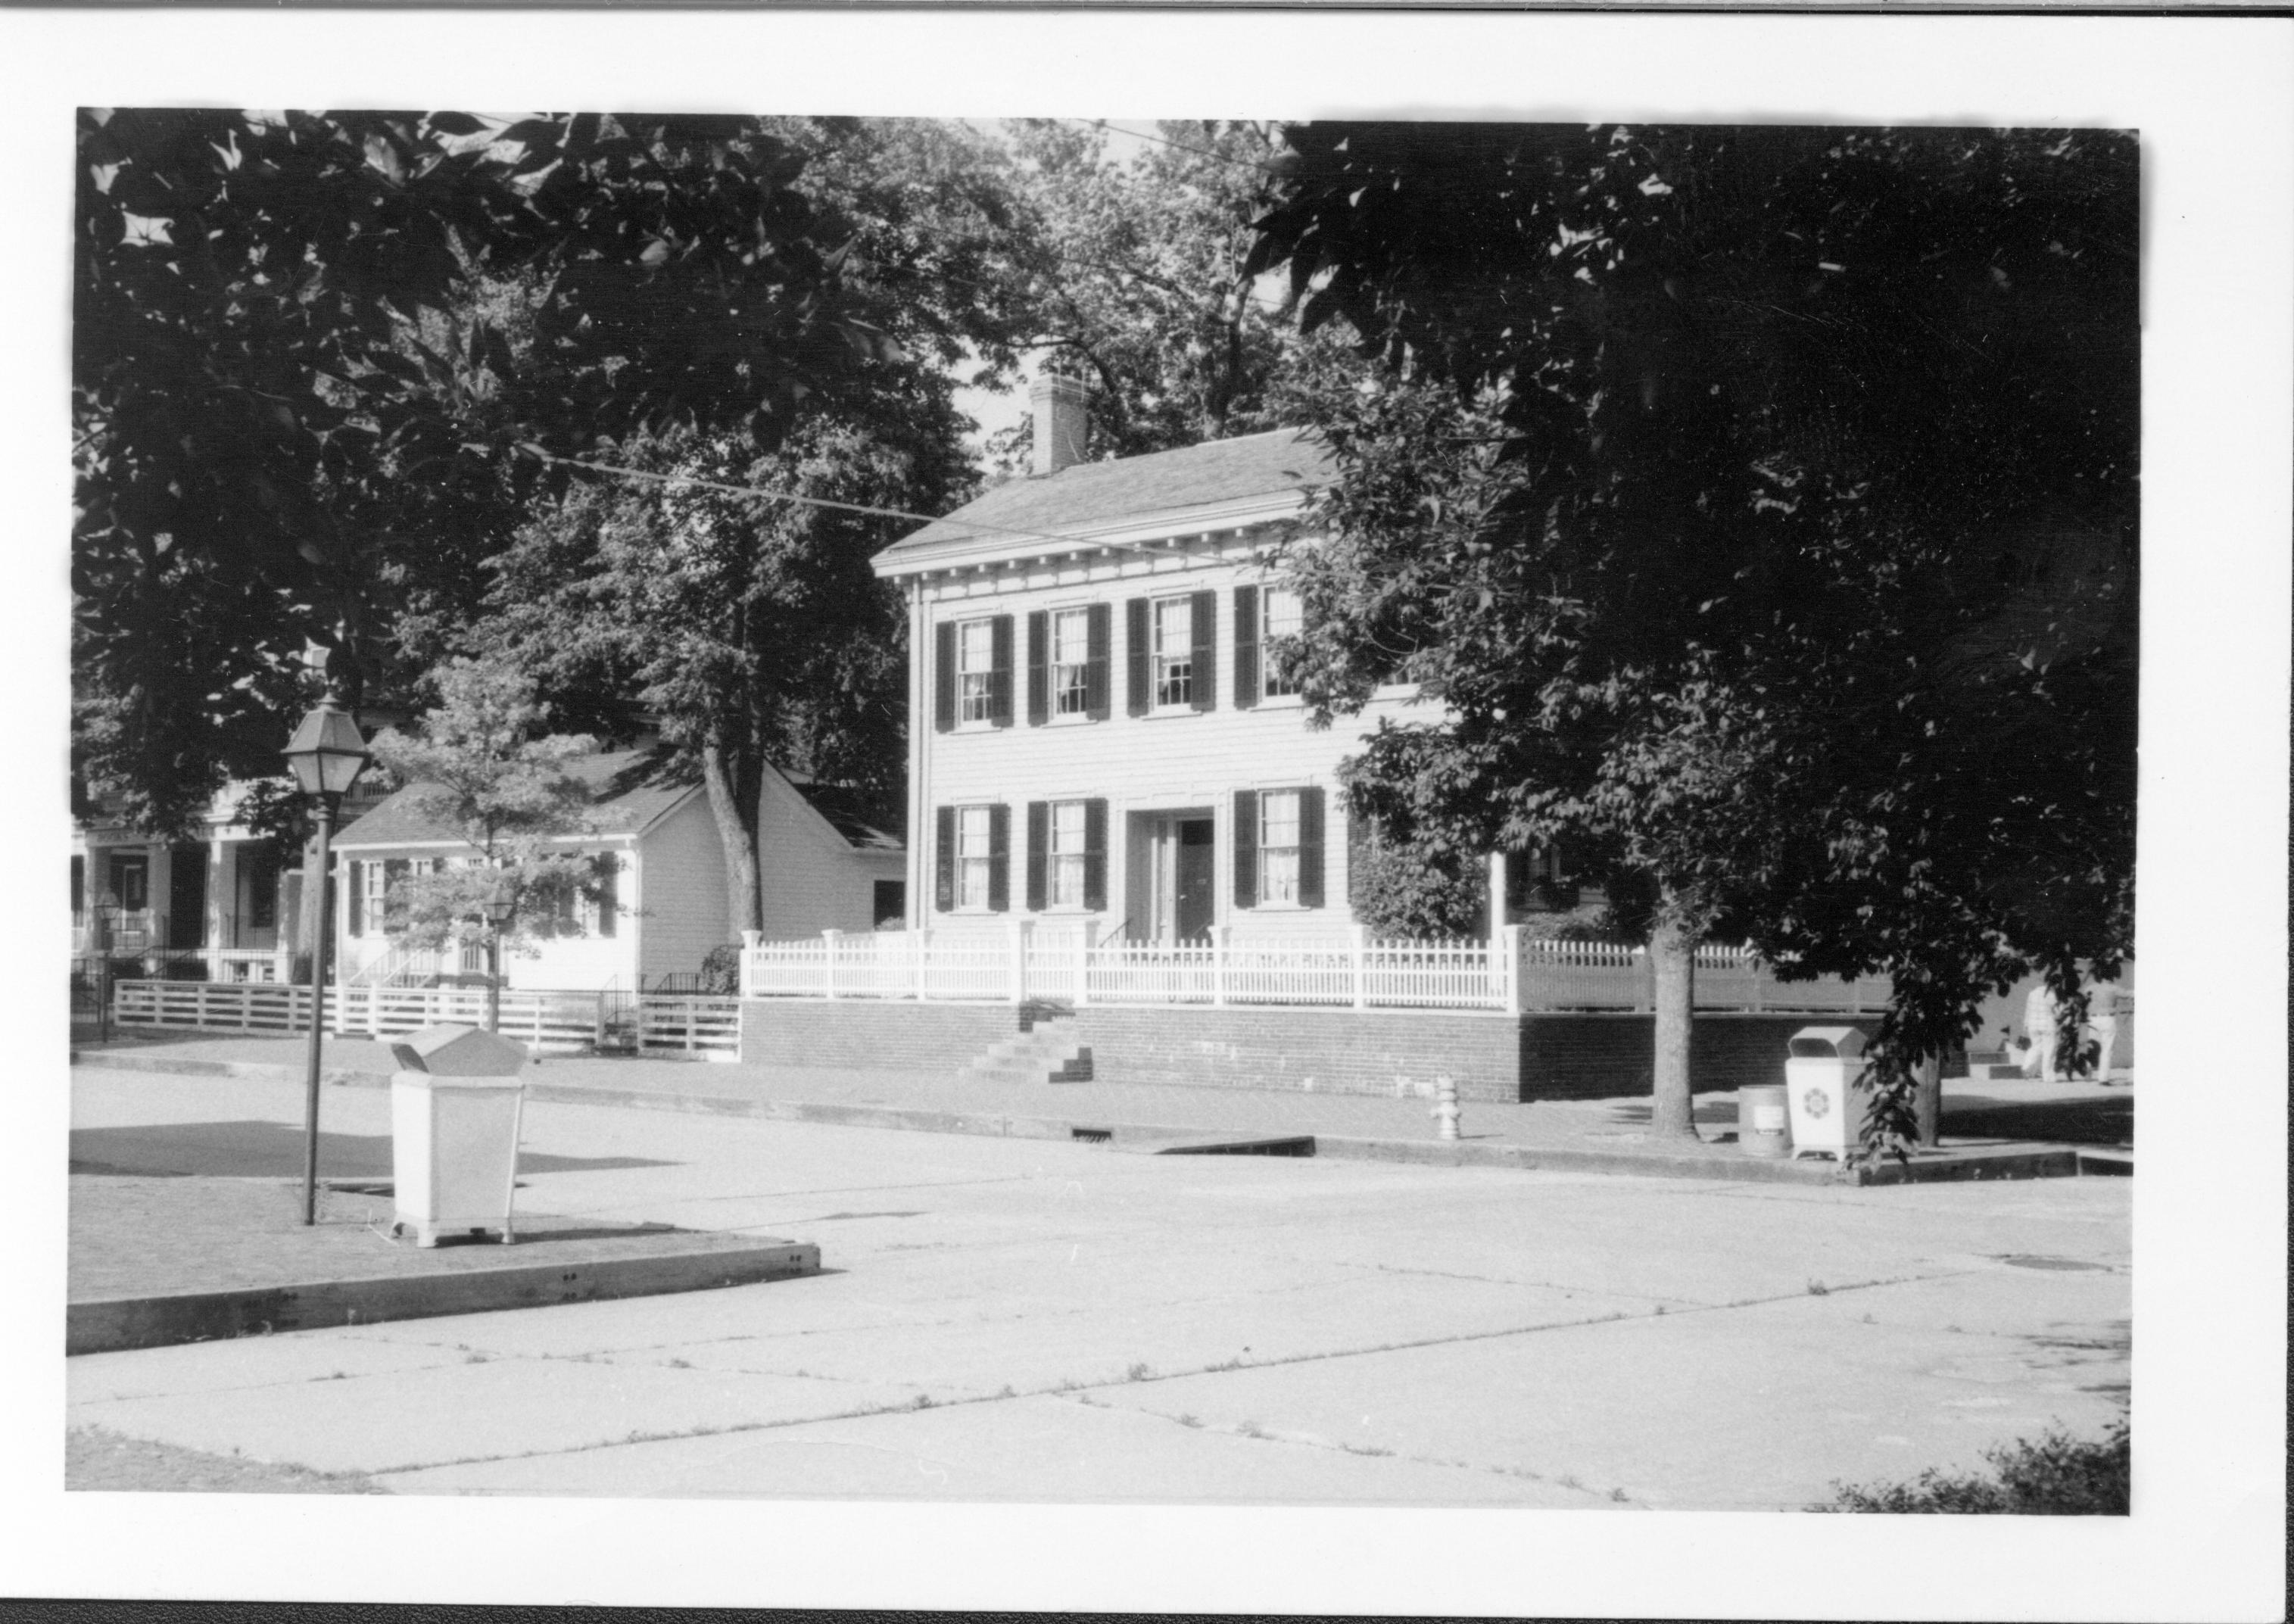 Lincoln Home from 8th and Jackson Street intersection. Corneau House on left, two-story house on Bugg lot (Block 10, Lot 5) on far left. Concrete streets, trash cans on corners, fire hydrant near street in front of Lincoln Home. Ramps leading to street. House appears to be painted white Looking Northeast Lincoln Home, Corneau, Bugg, ramps, summer, fire hydrant, painted white (?)